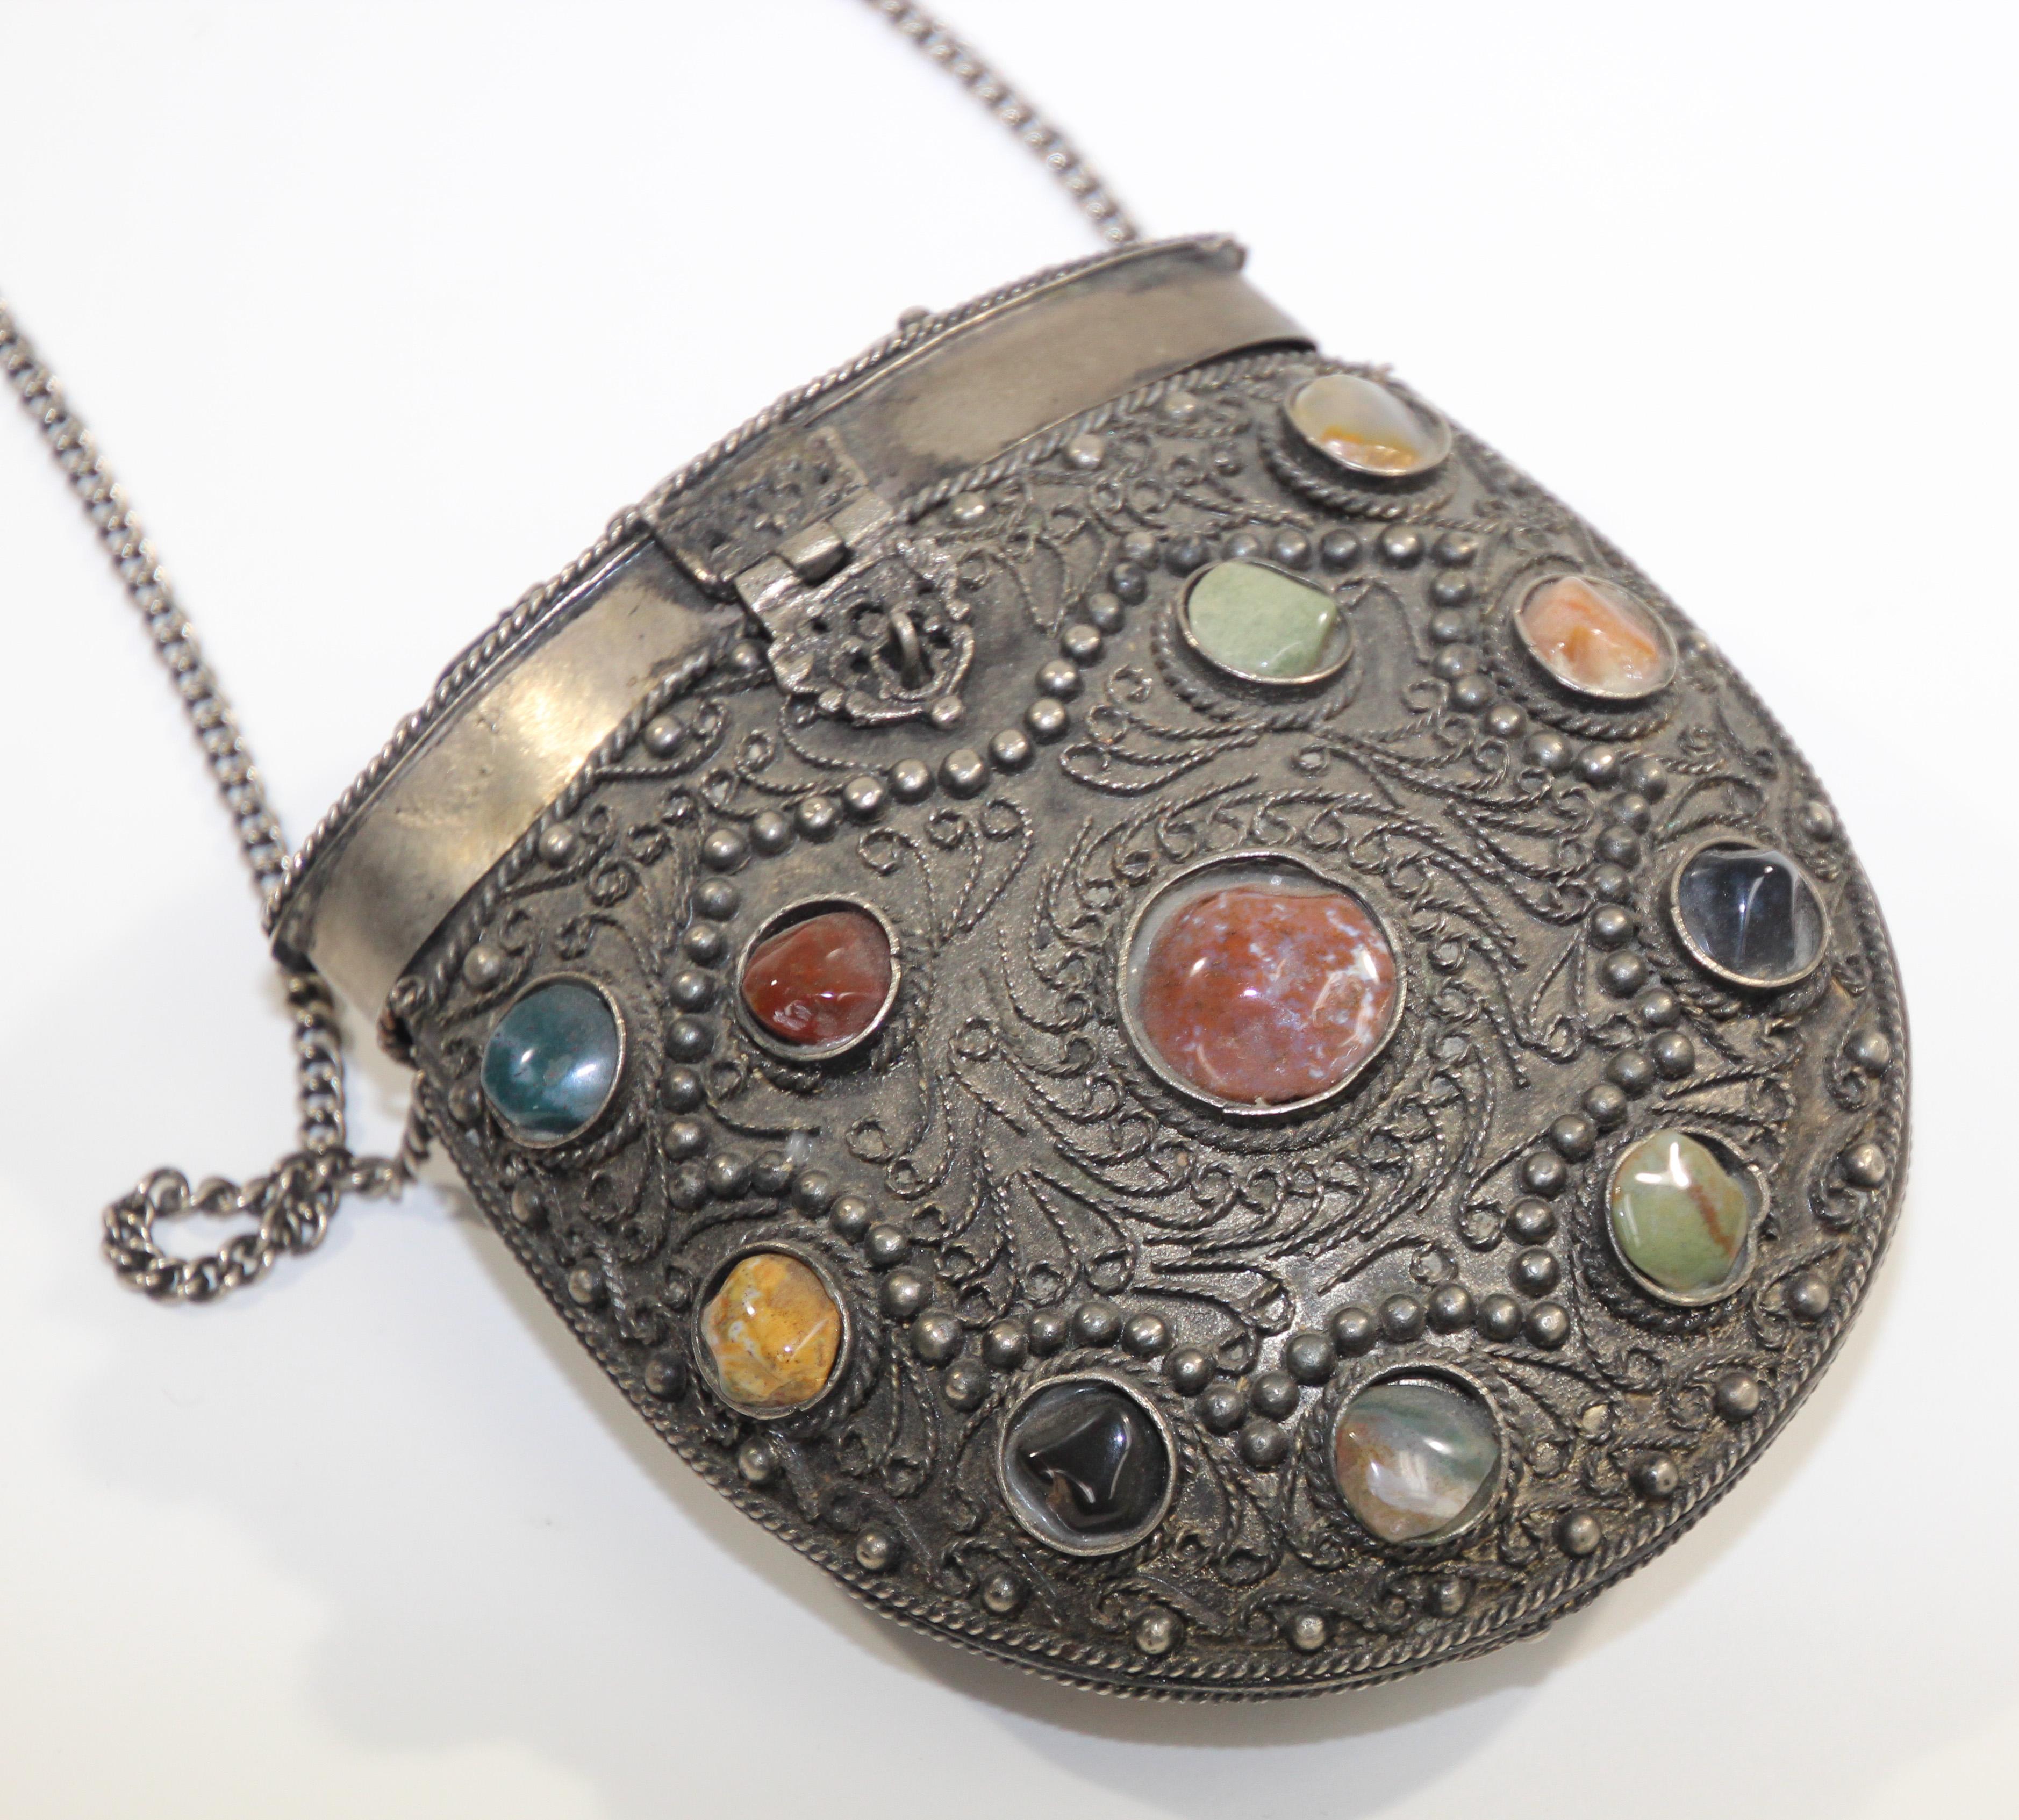 Vintage Sajai metal and agate talisman box coin purse, Handmade in India,
Handmade Sajai metal cross body purse with multi-colored agates and intricately applied metal windings. 
Sajai means ‘to decorate or beautify.
This is a filagree metal